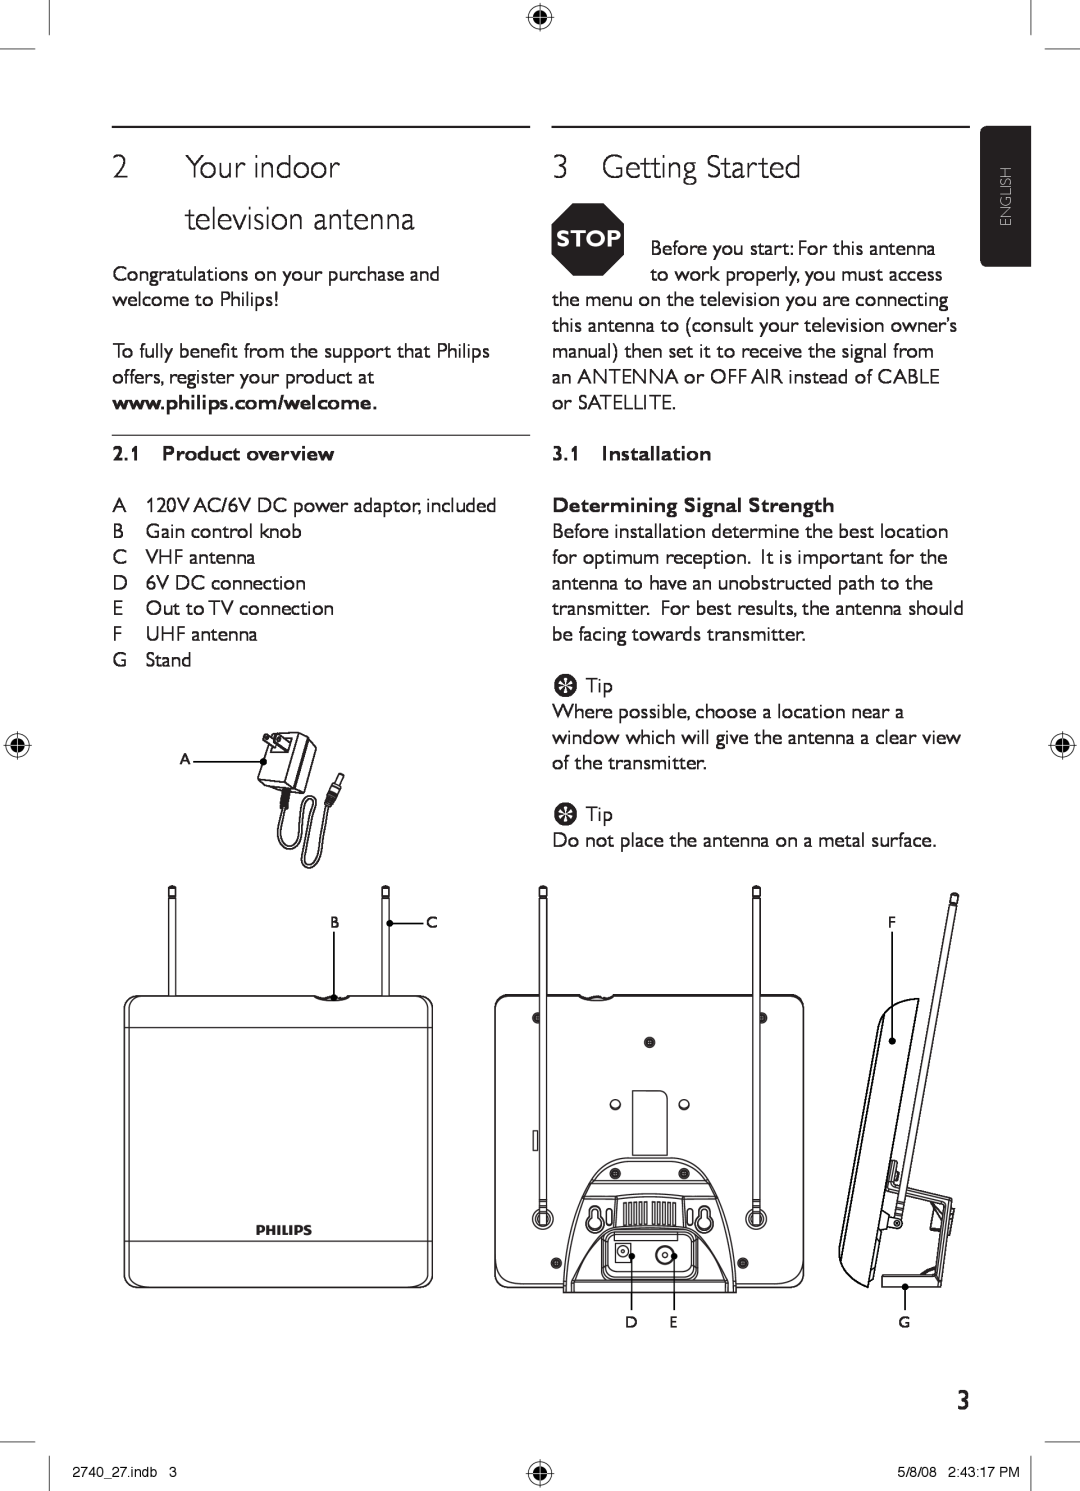 Philips SDV2740/27 manual 2Your indoor television antenna, Getting Started, Stop, Before you start For this antenna 